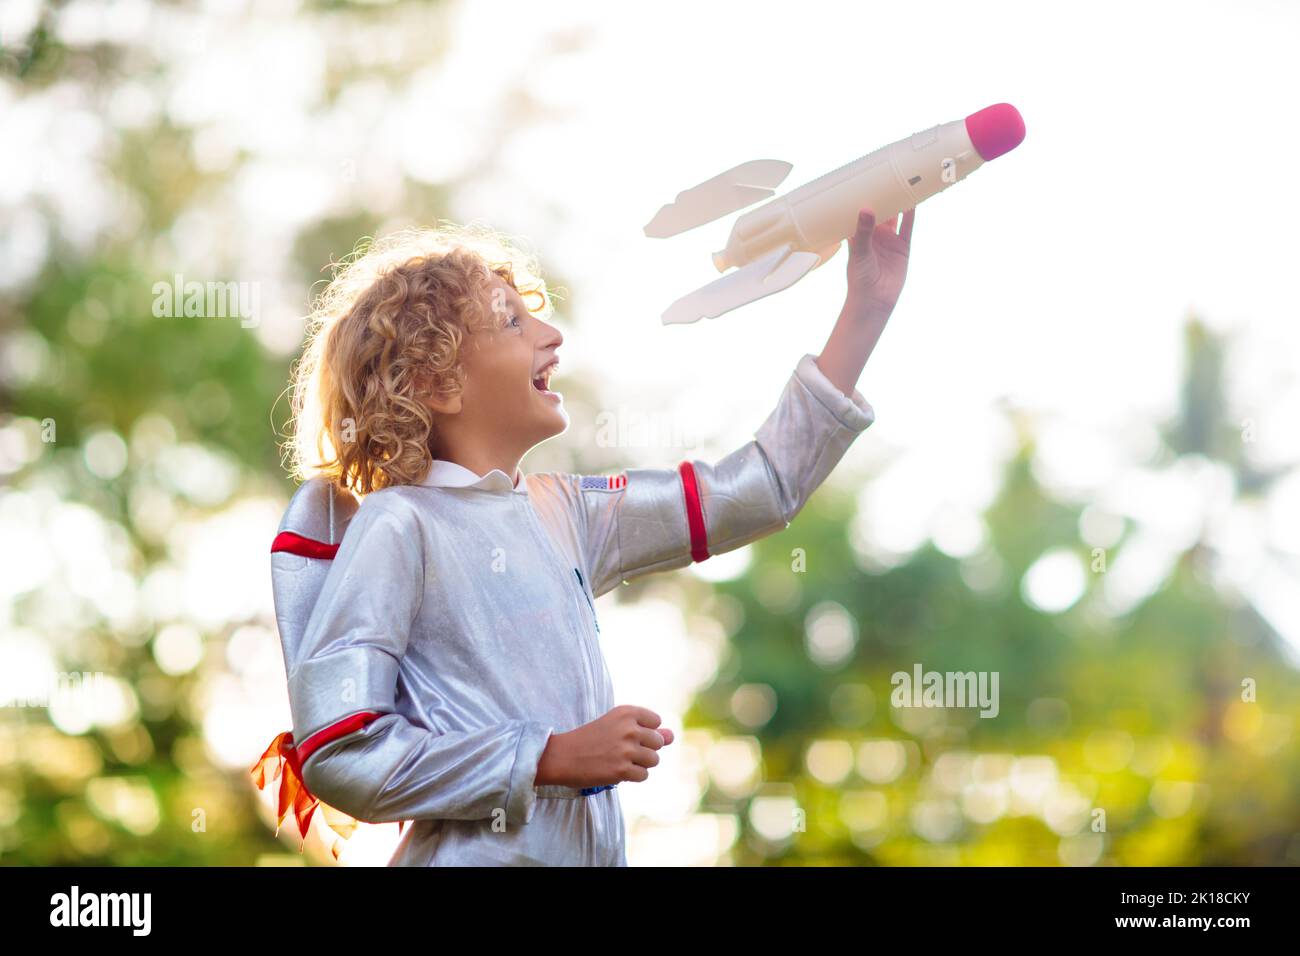 Little boy playing with spaceship. Astronaut costume for Halloween party. Creative child with space rocket. Kids dream and imagine. Role play for chil Stock Photo